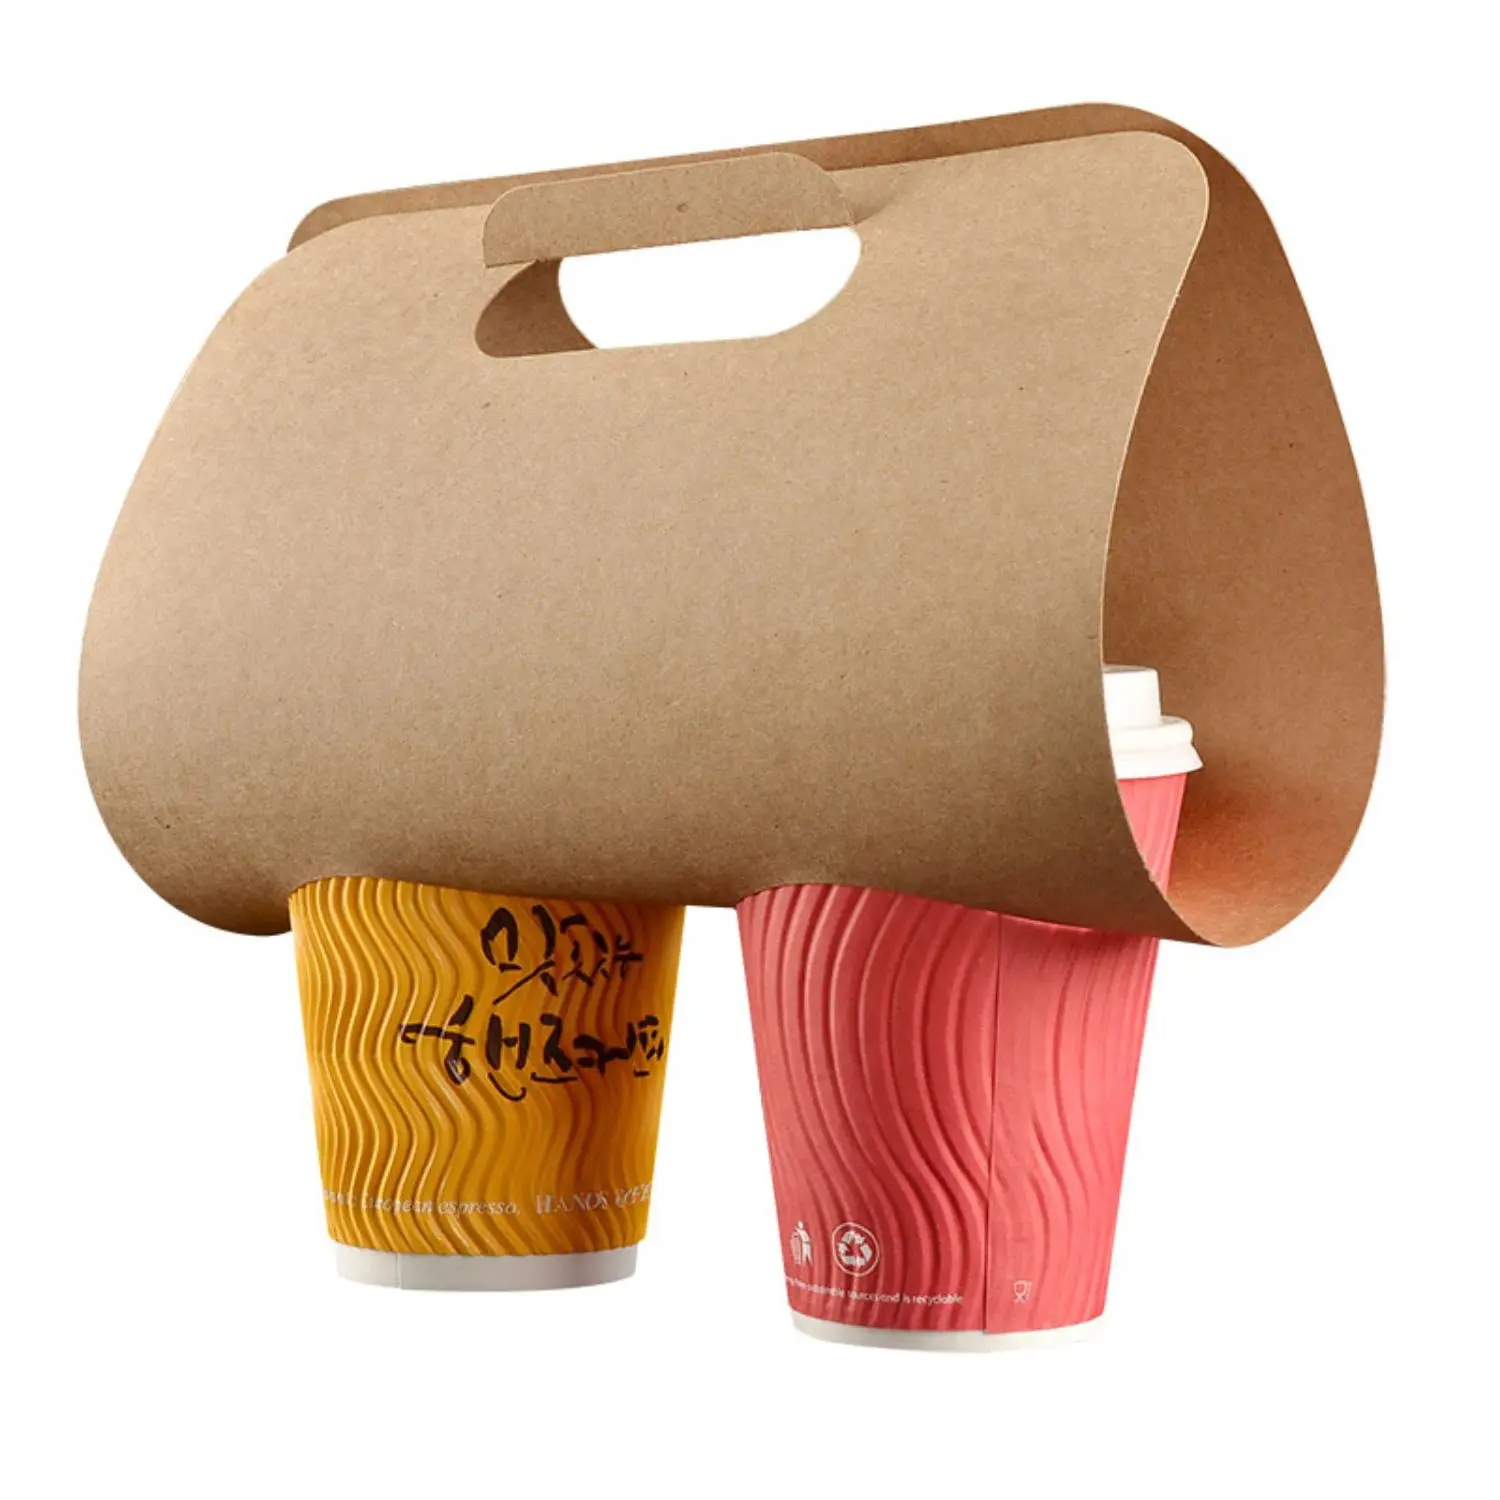 Double 2 Cups Flat Packaging Coffee To Go Cup Holder Paper Bag Buy 2 Cups Cup Holder Paper Bag Coffee To Go Cup Packaging Flat Packing Cup Holder Product On Alibaba Com